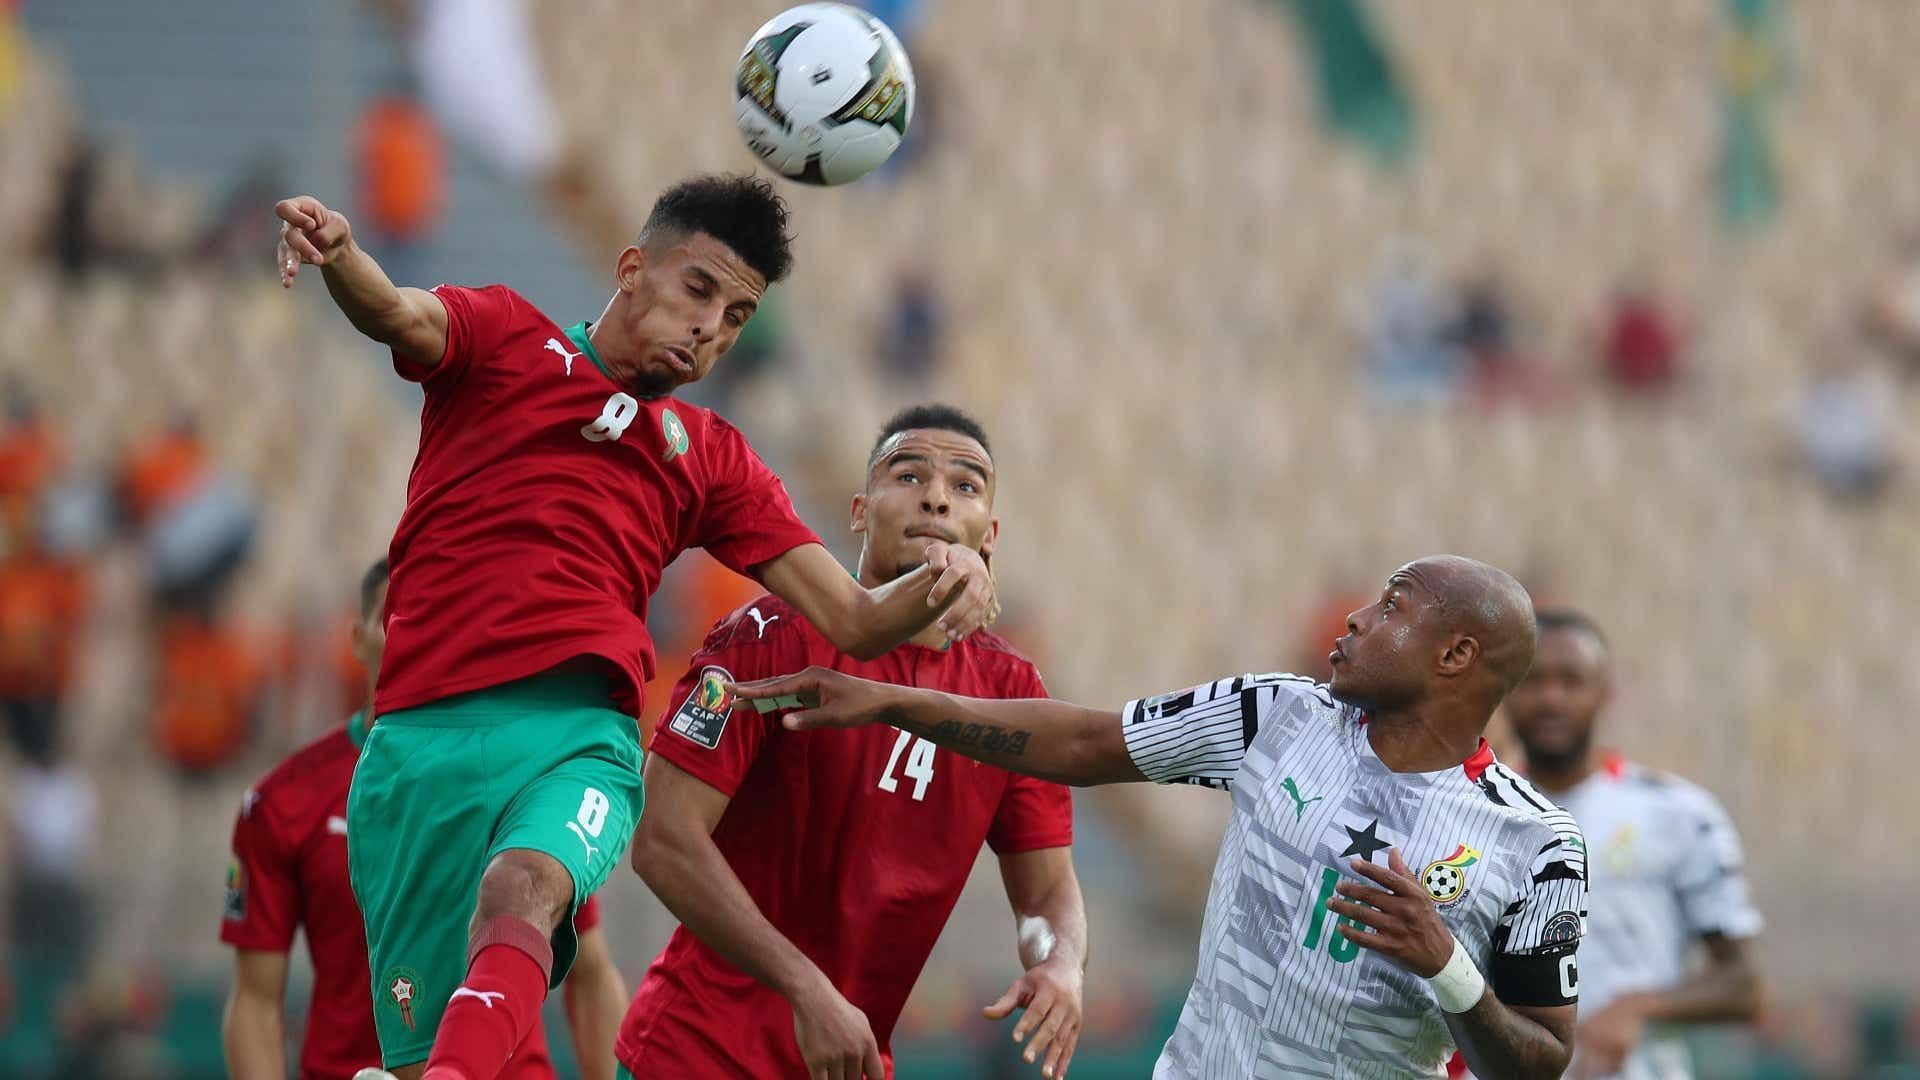 Morocco had a winning start at the AFCON against Ghana. (Image Courtesy: Goal.com)